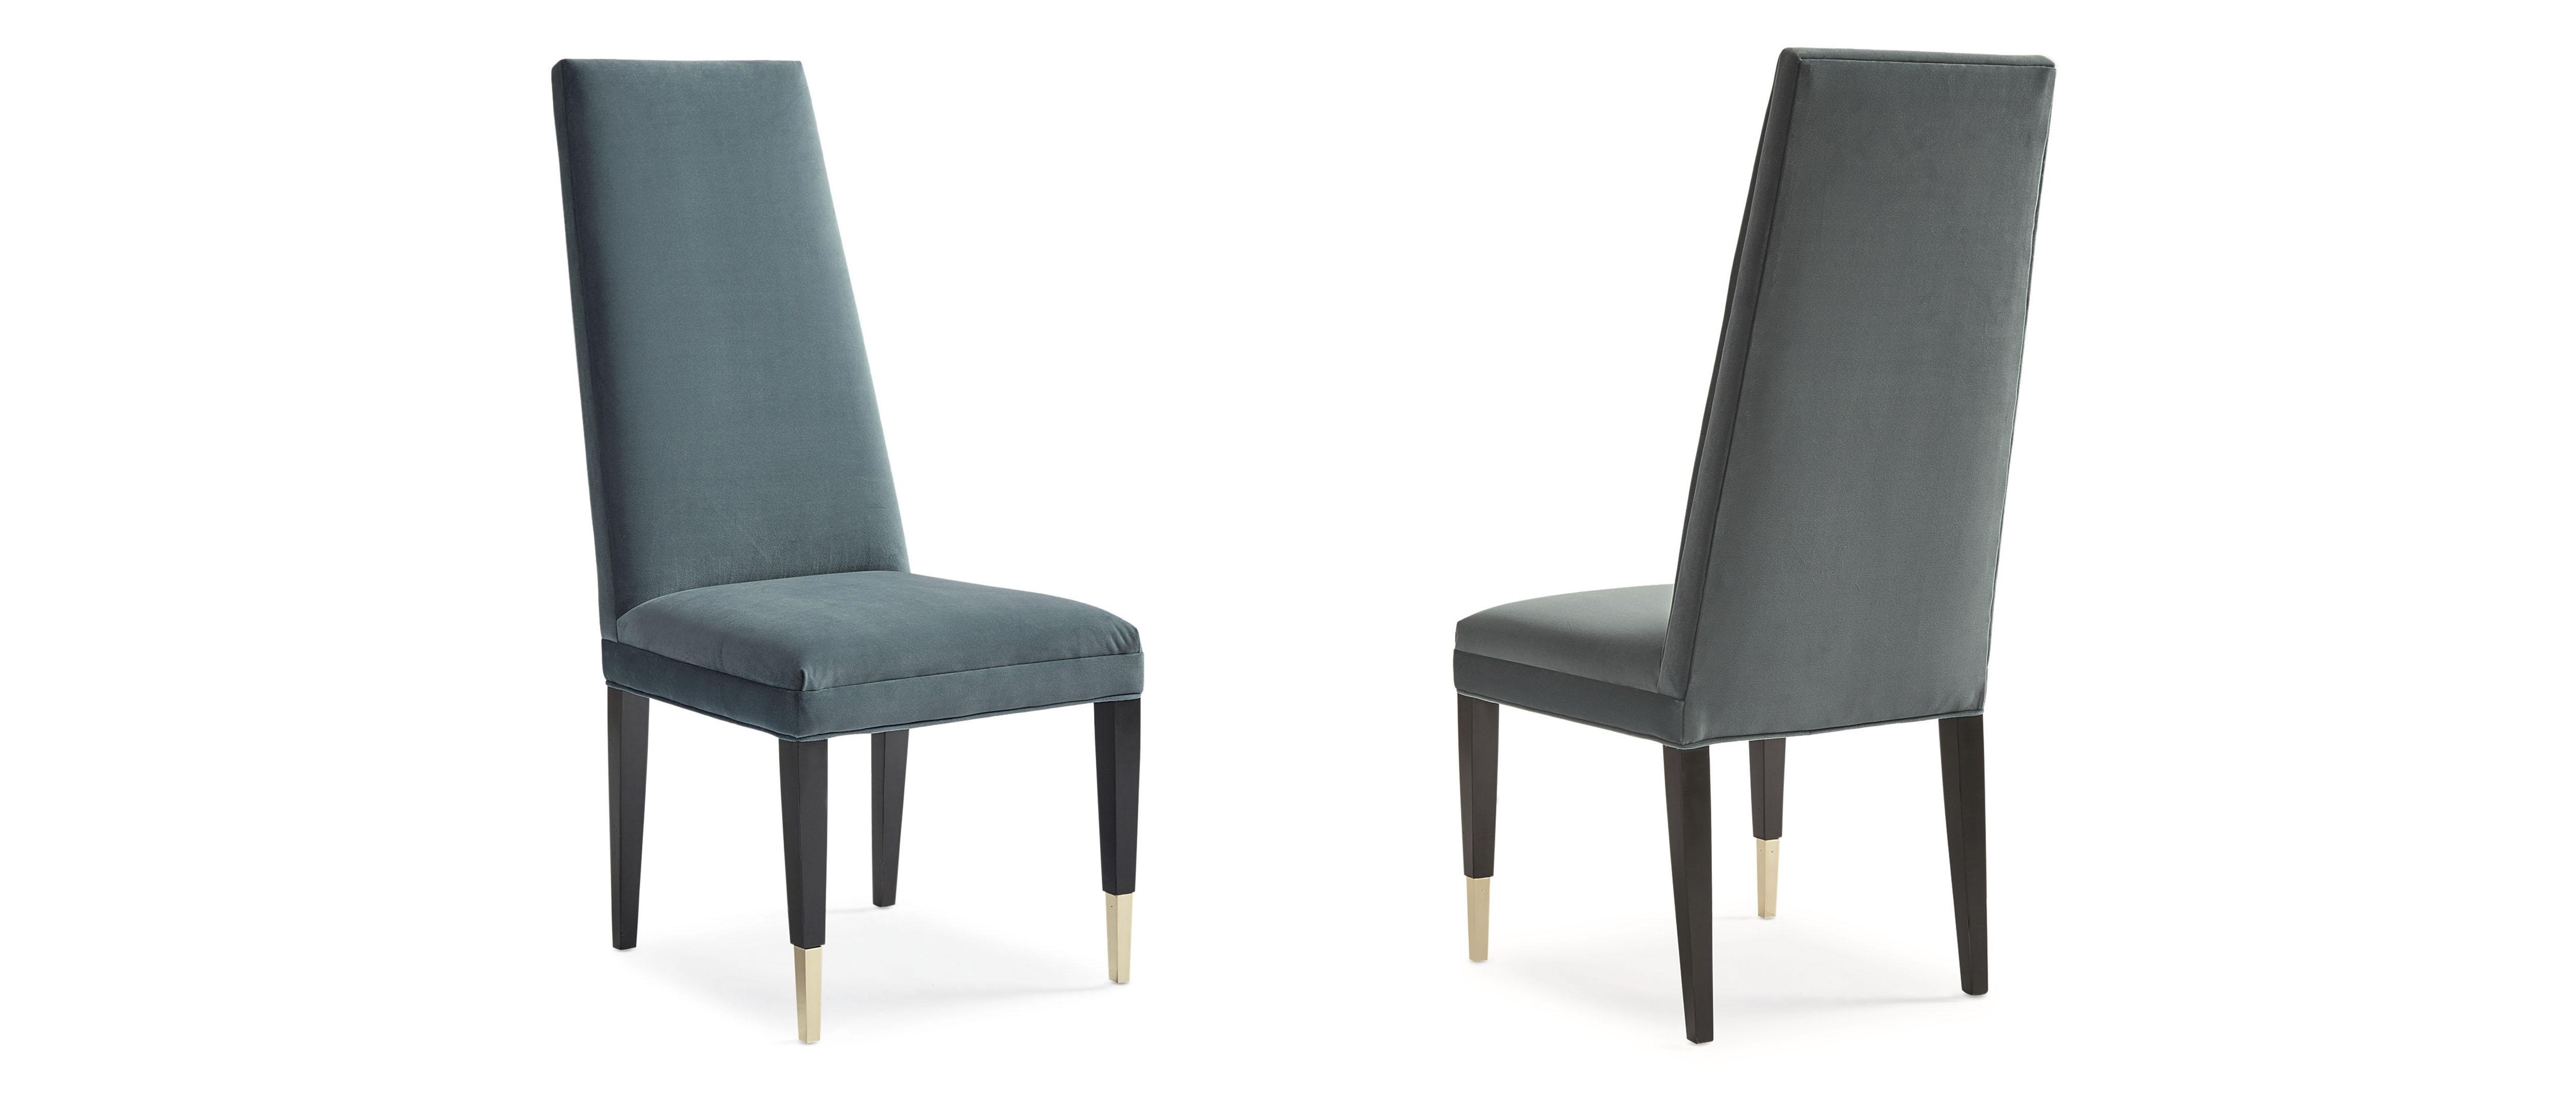 Modern Dining Chair Set THE MASTERS DINING SIDE CHAIR SIG-017-283-Set-2 in Teal, Gold Velvet